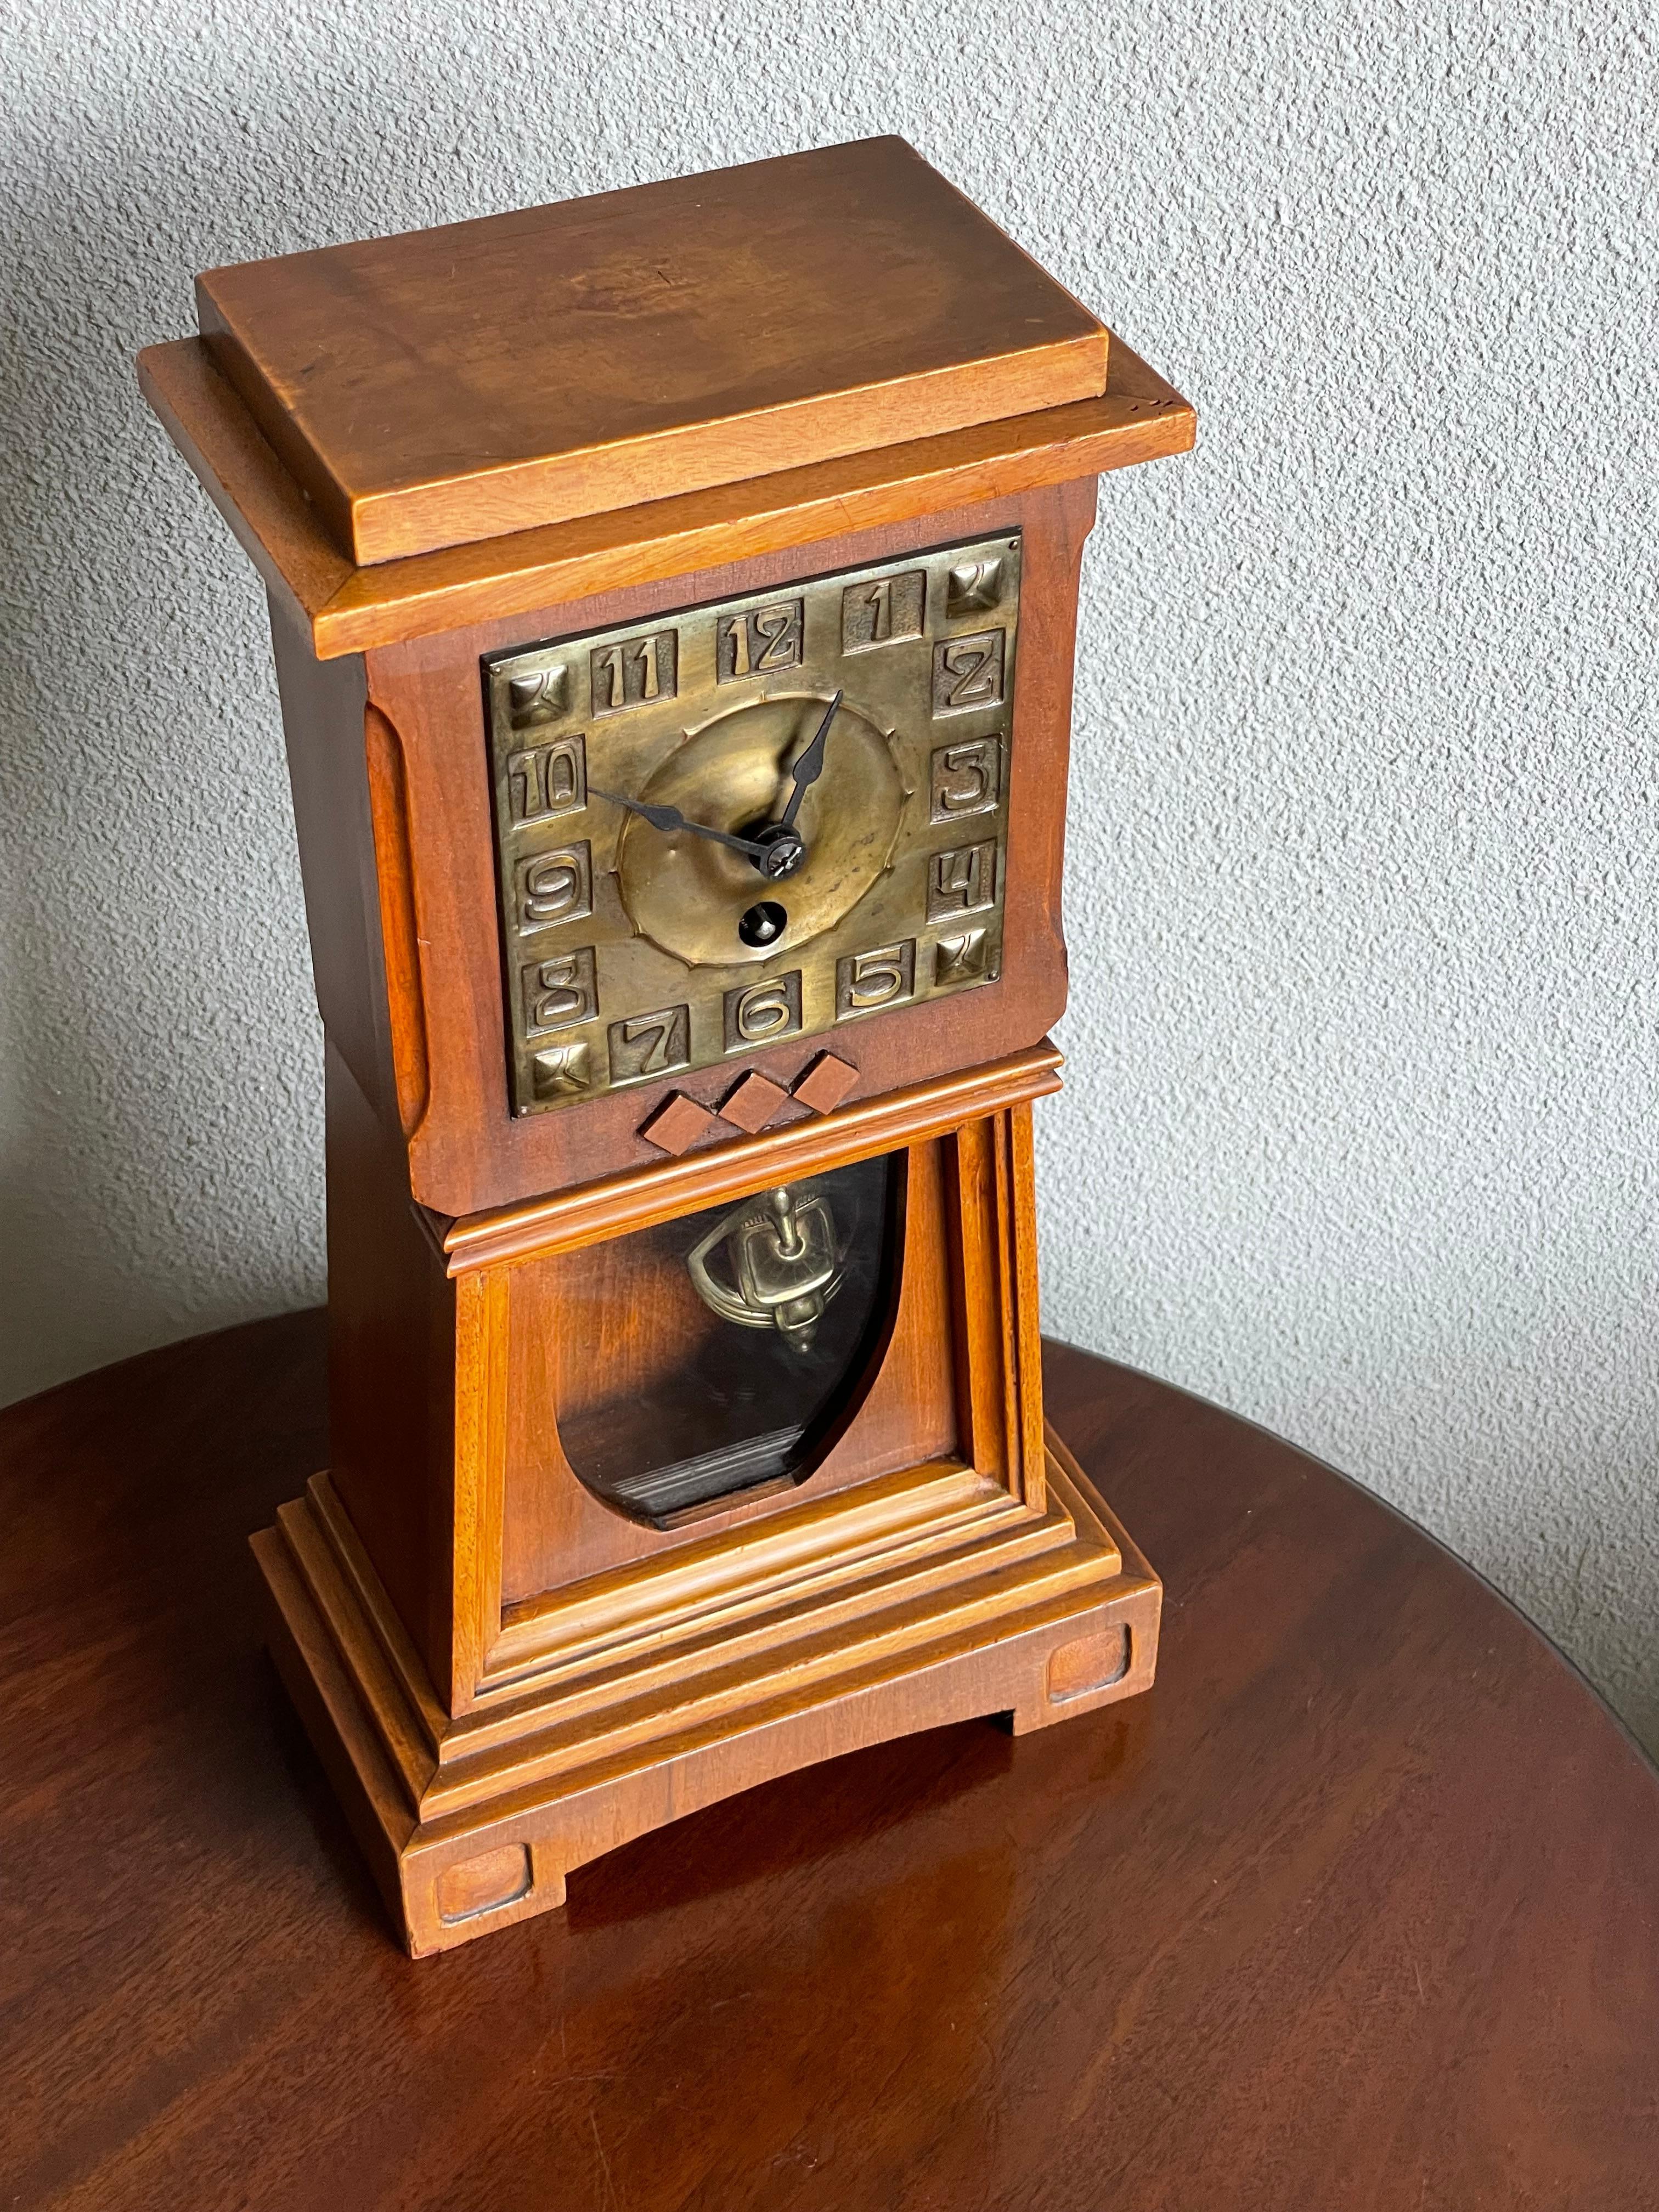 European Arts and Crafts Nutwood Mantel or Table Clock with an Embossed Brass Dial Face For Sale